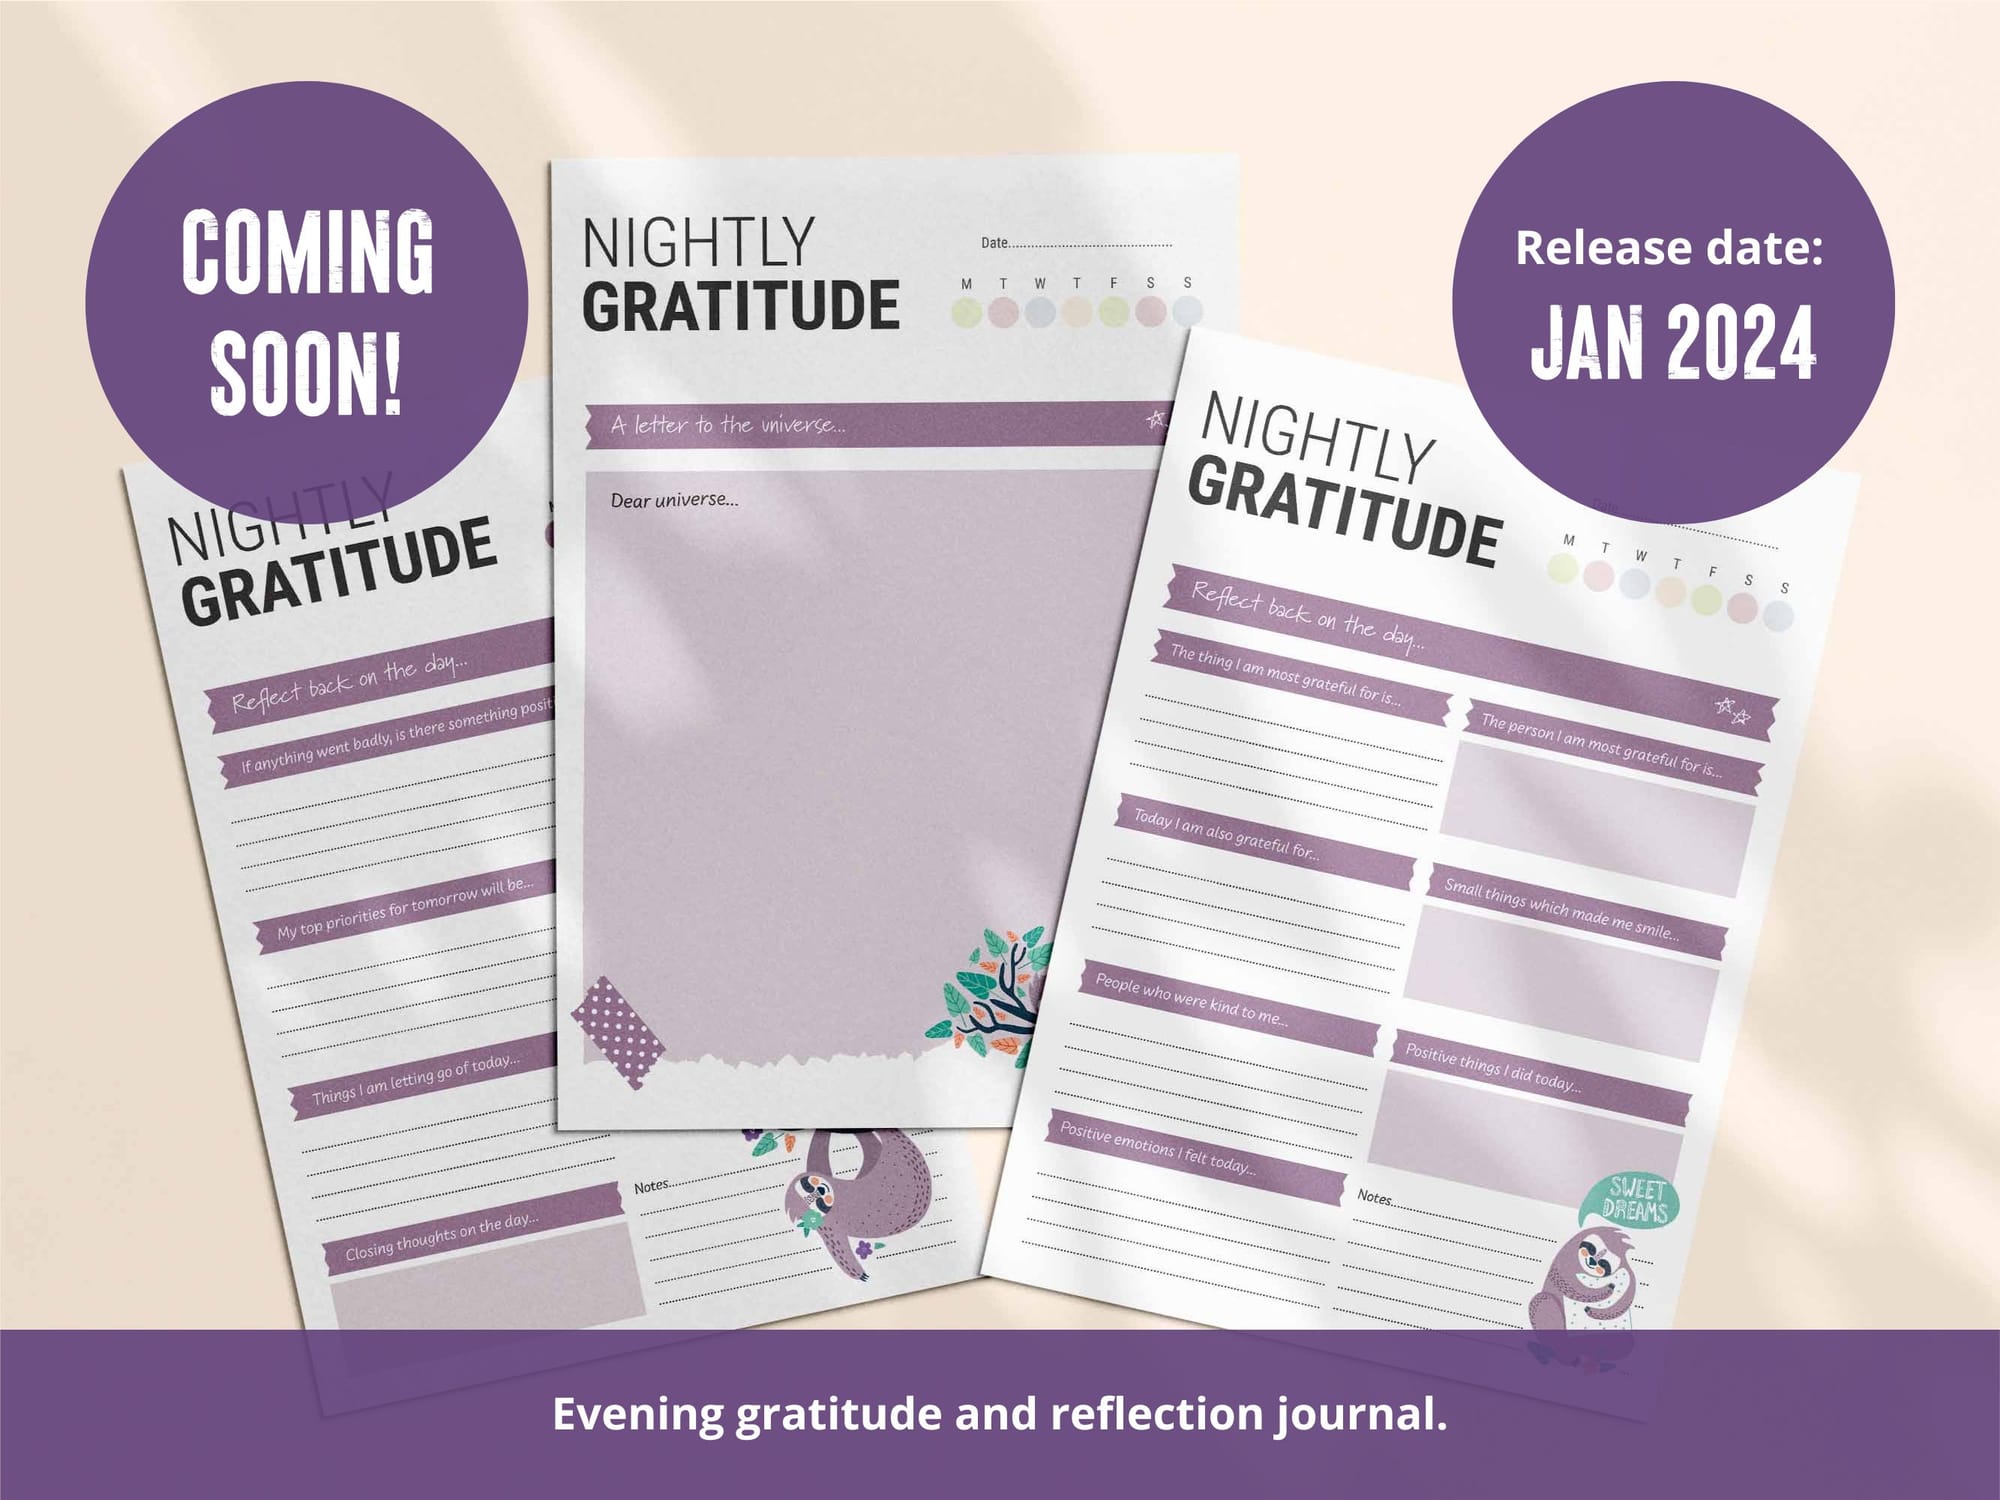 To be released in January 2024: Printable nightly gratitude and reflection journal.